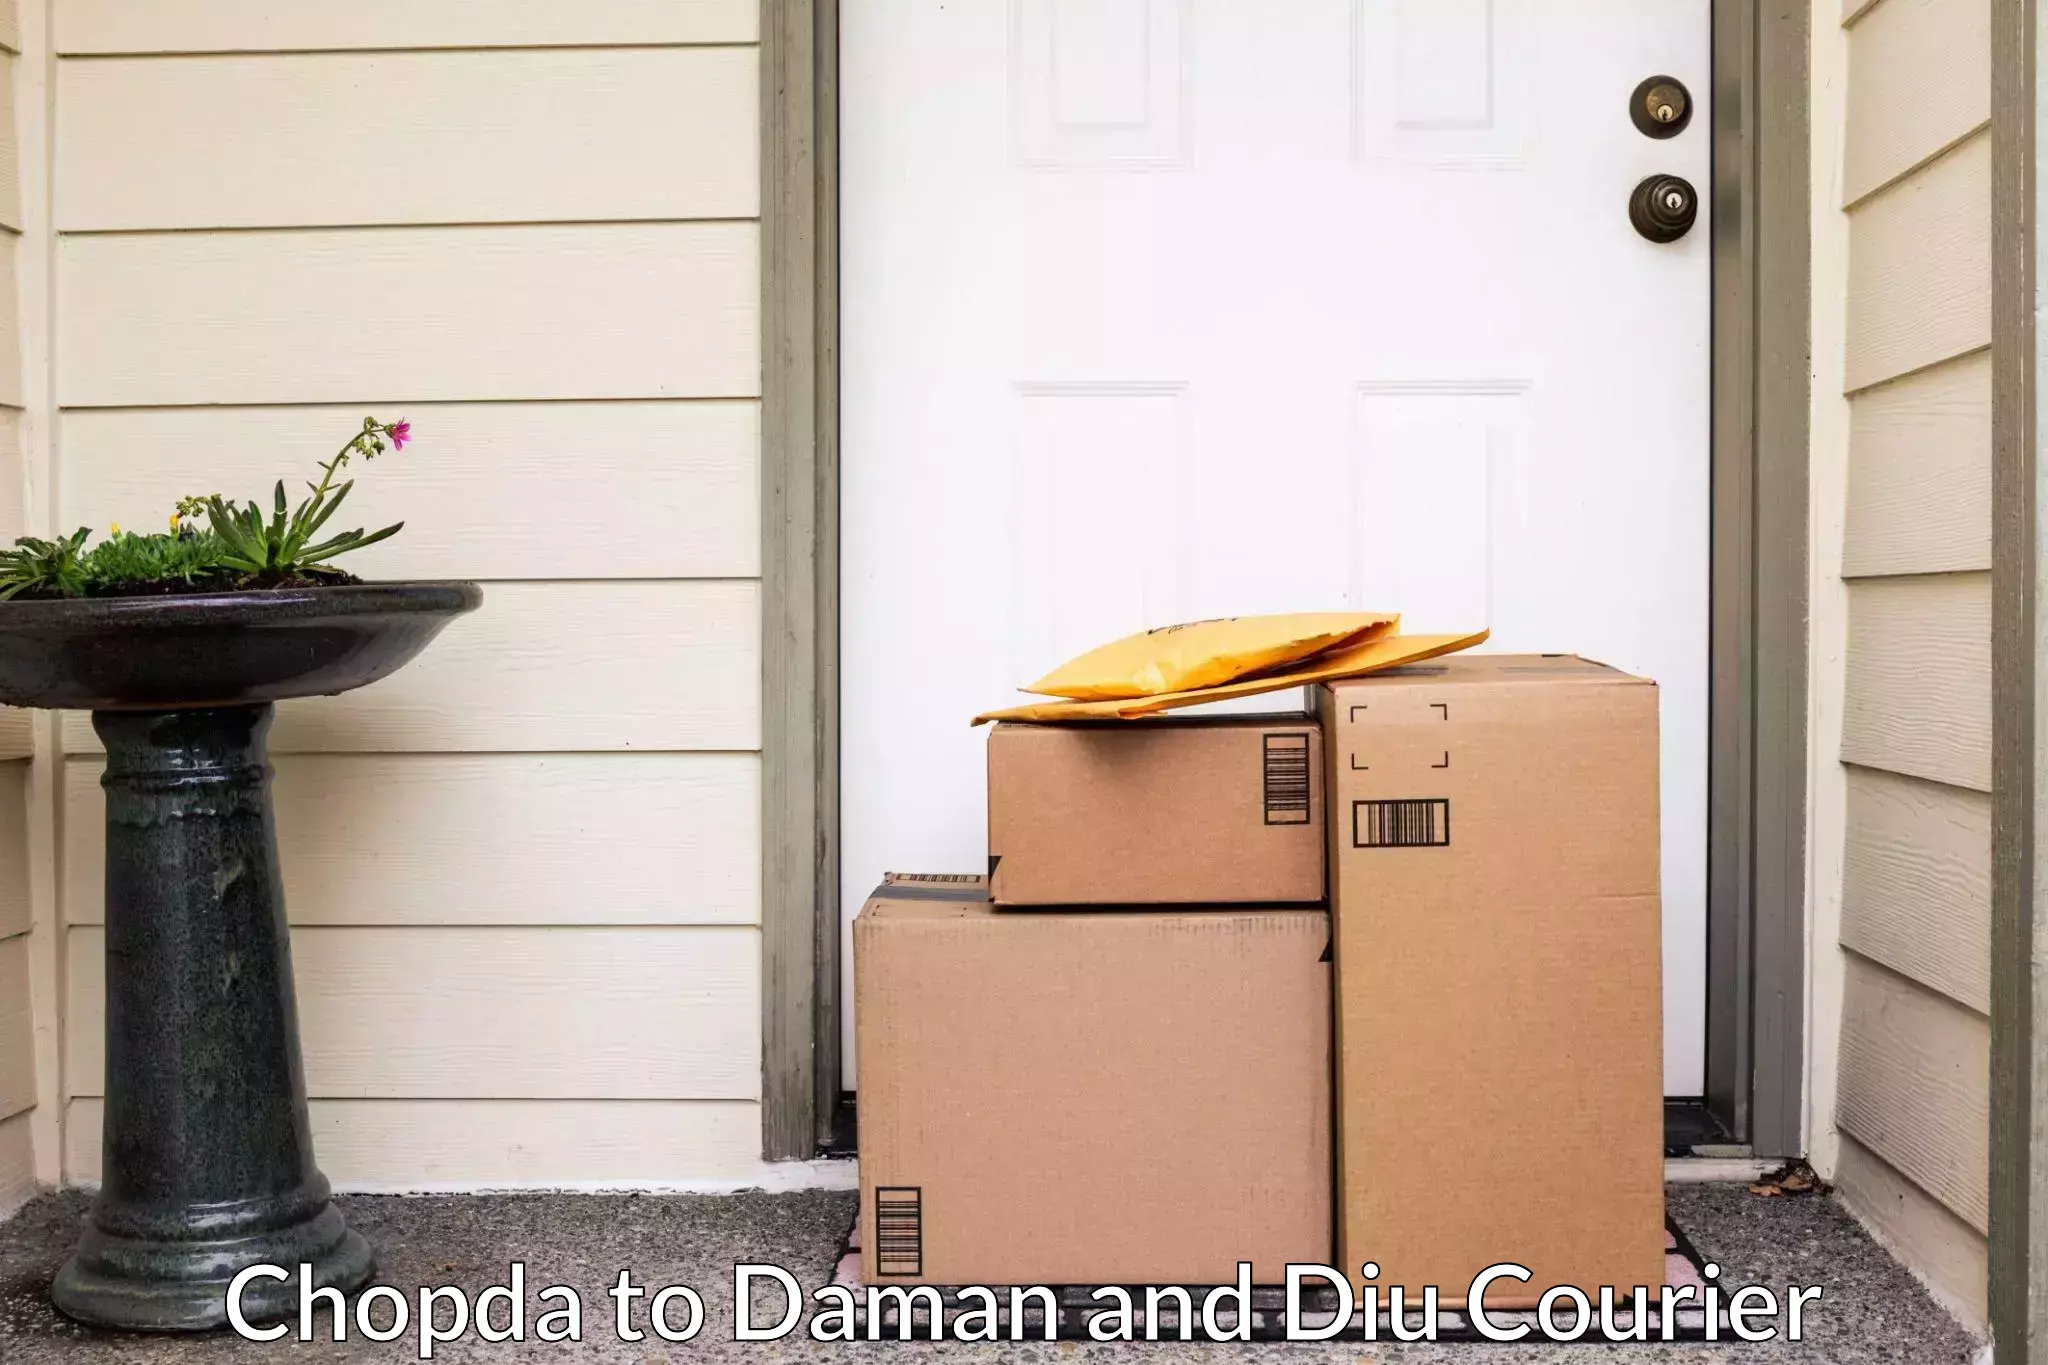 Furniture delivery service Chopda to Daman